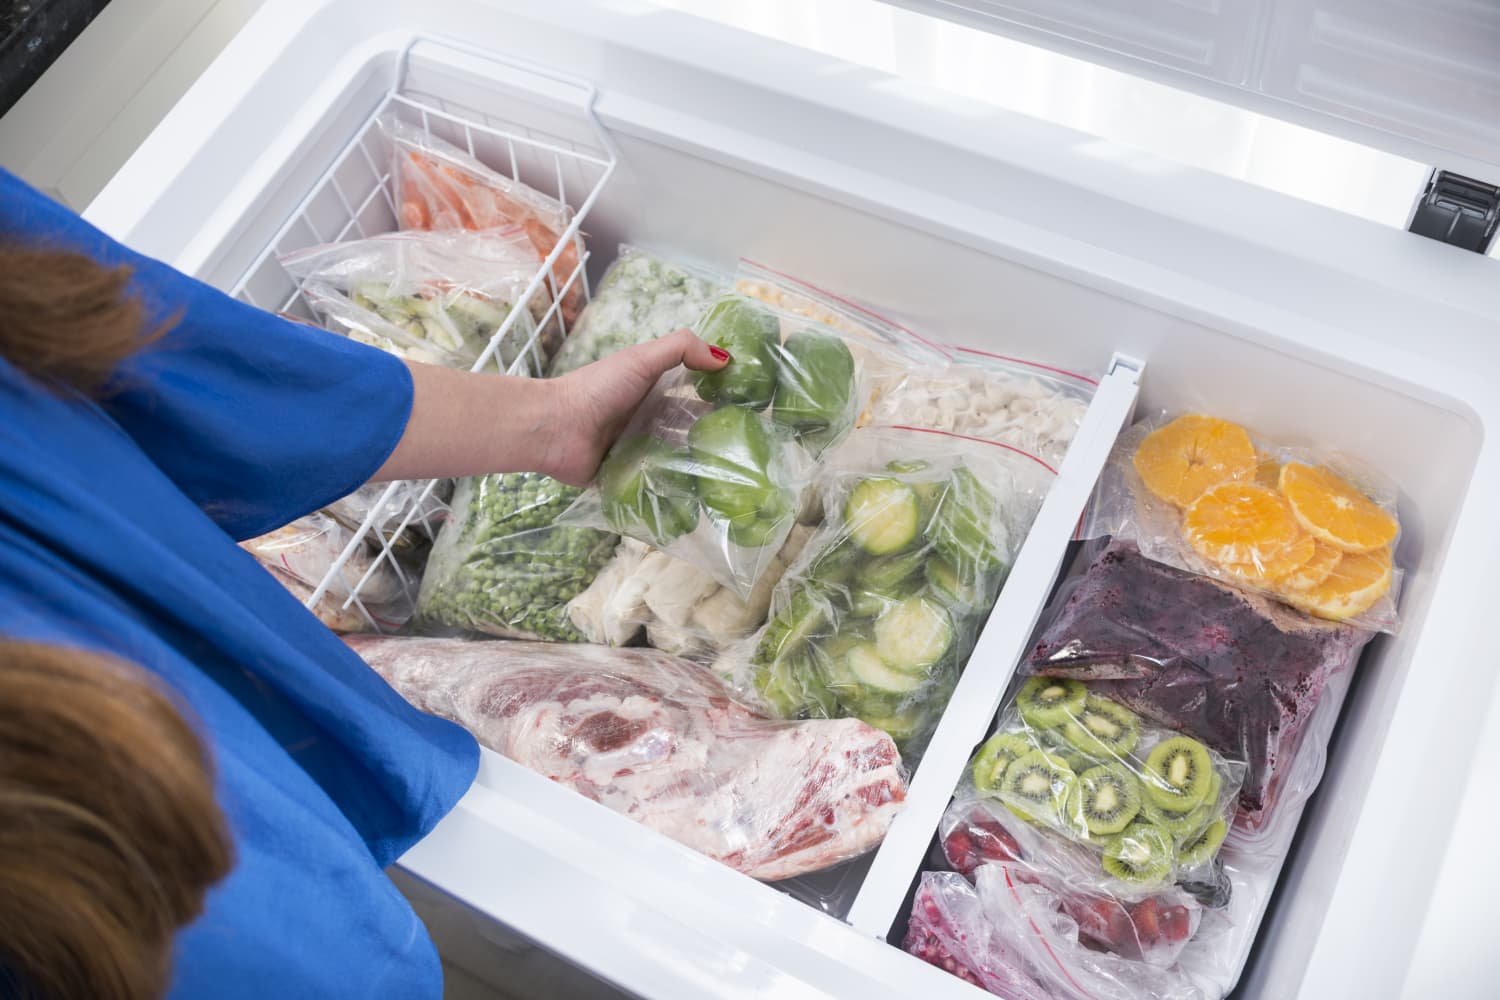 How to Organize a Chest Freezer – Organizing Tips & Ideas